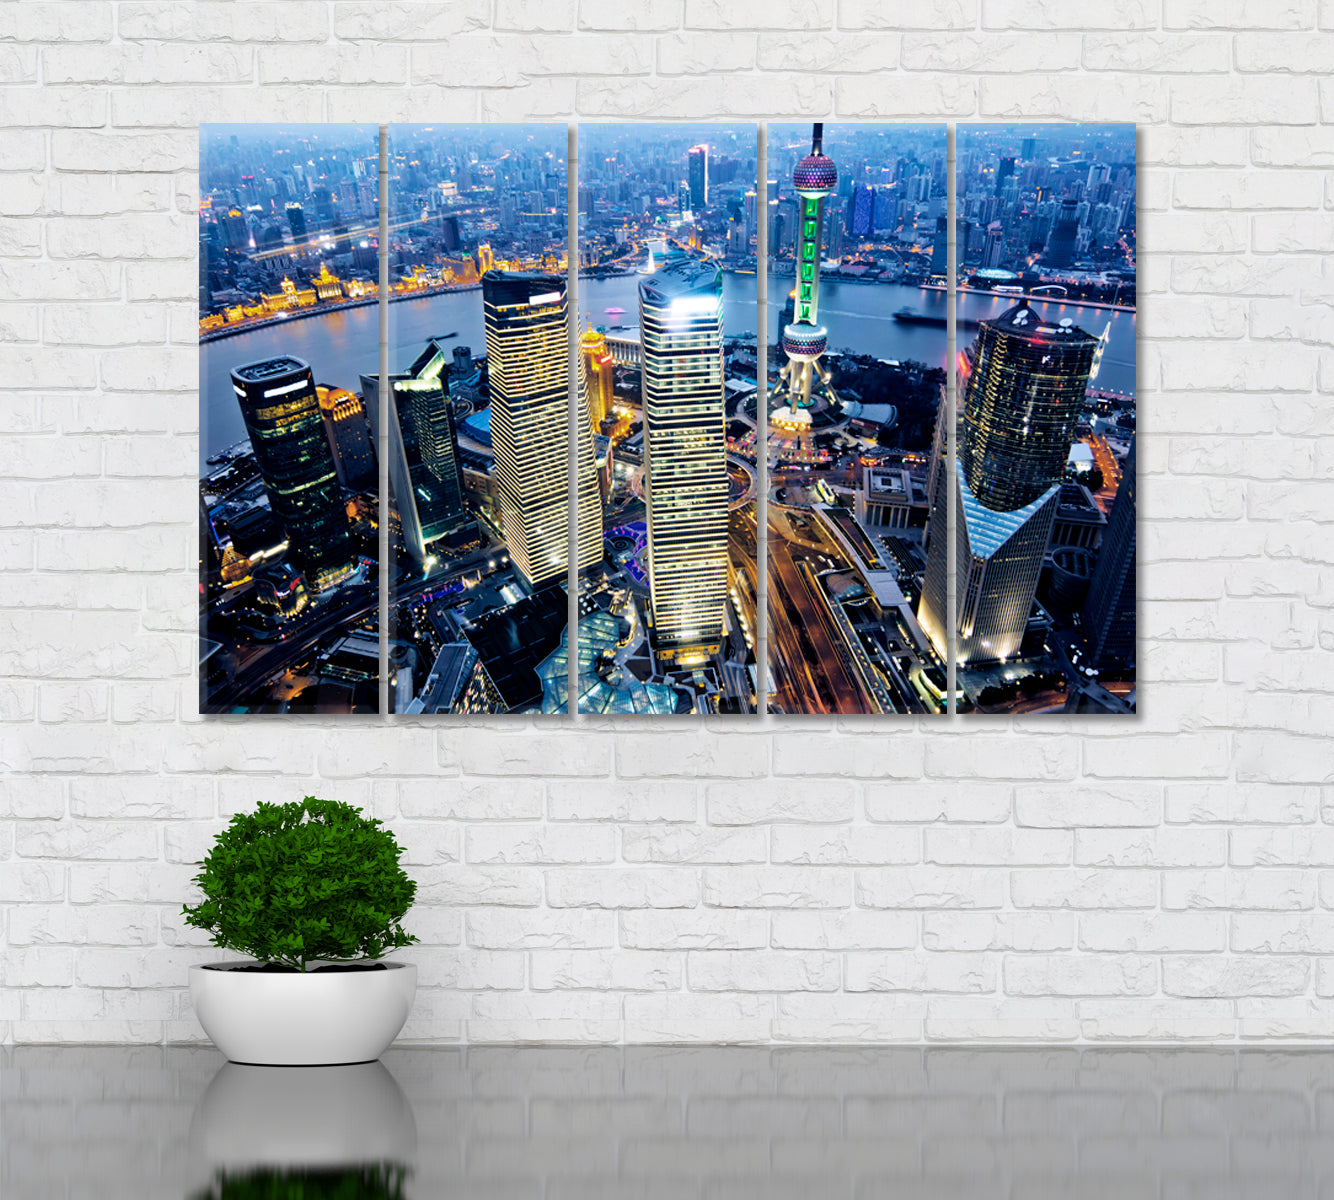 Shanghai Downtown at Night Canvas Print ArtLexy 5 Panels 36"x24" inches 